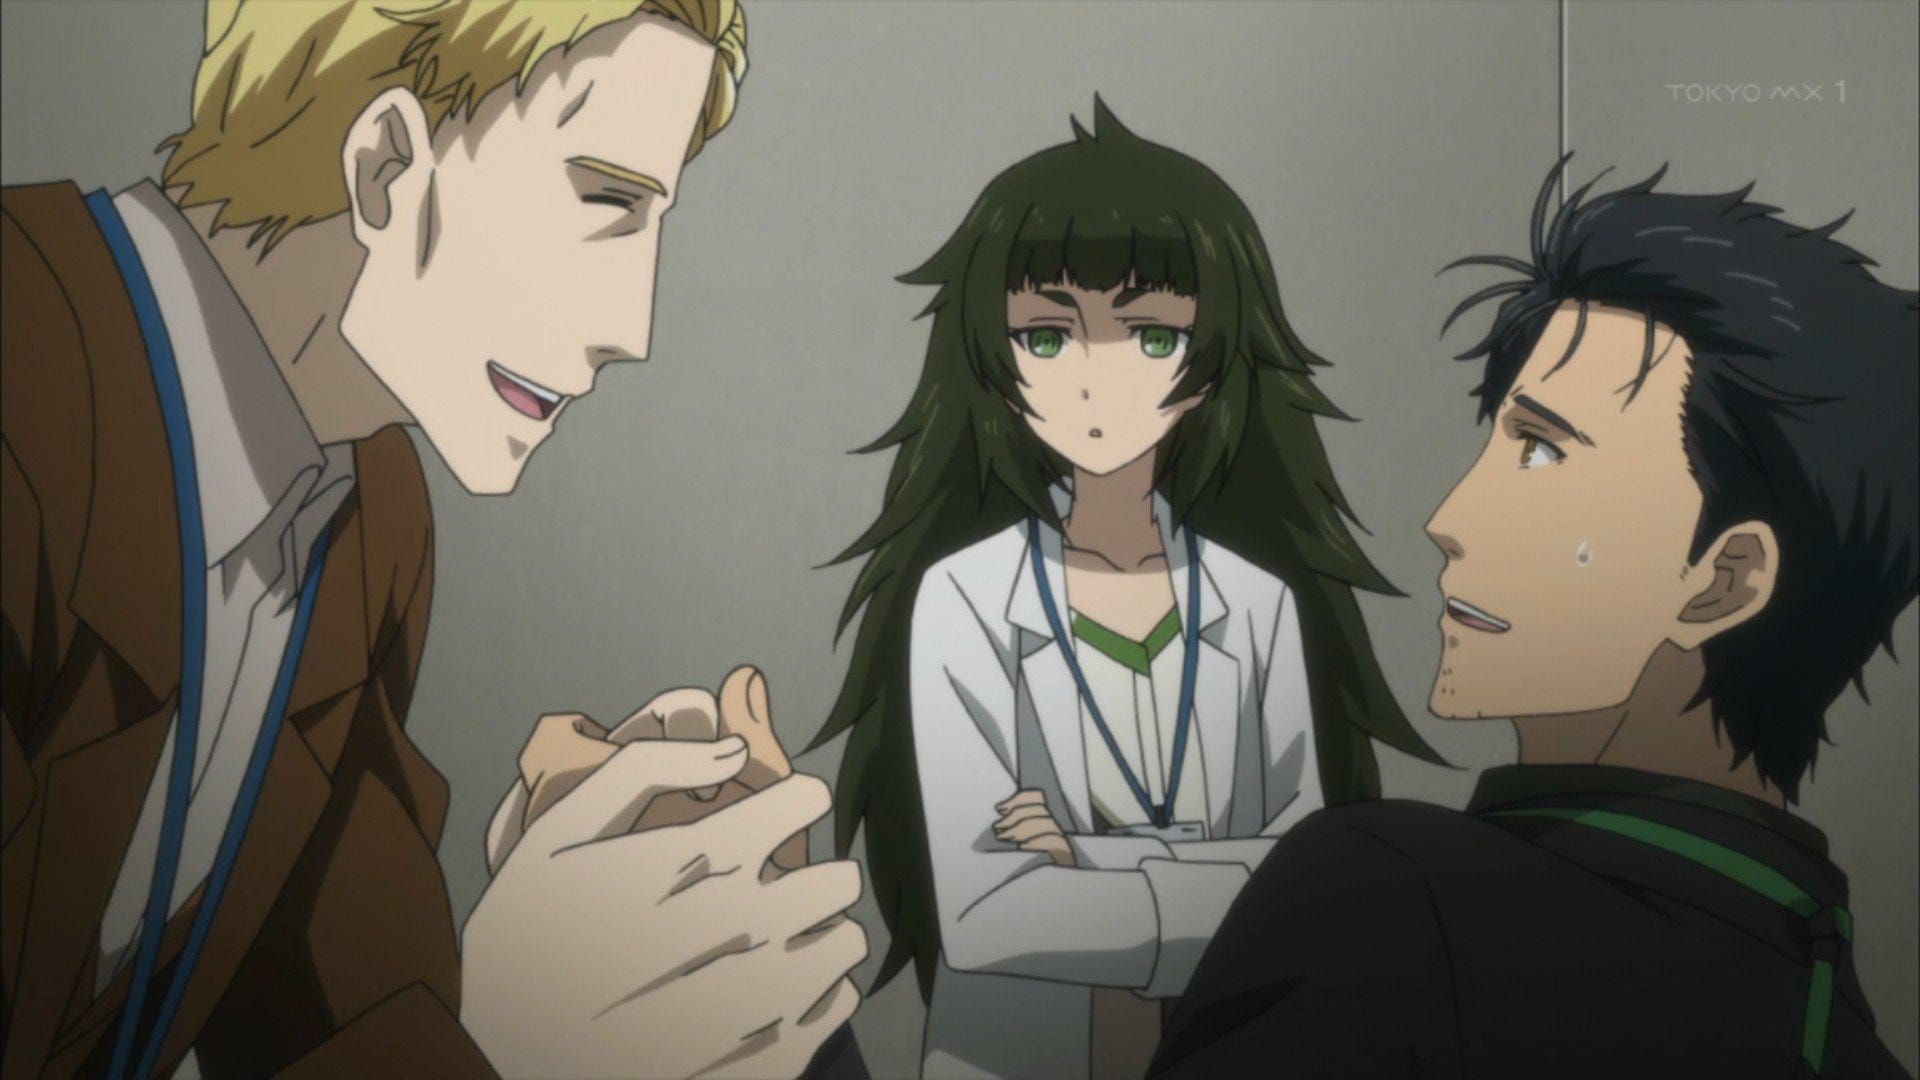 reviewing: Steins;Gate 0.. I dislike watching ongoing series. The